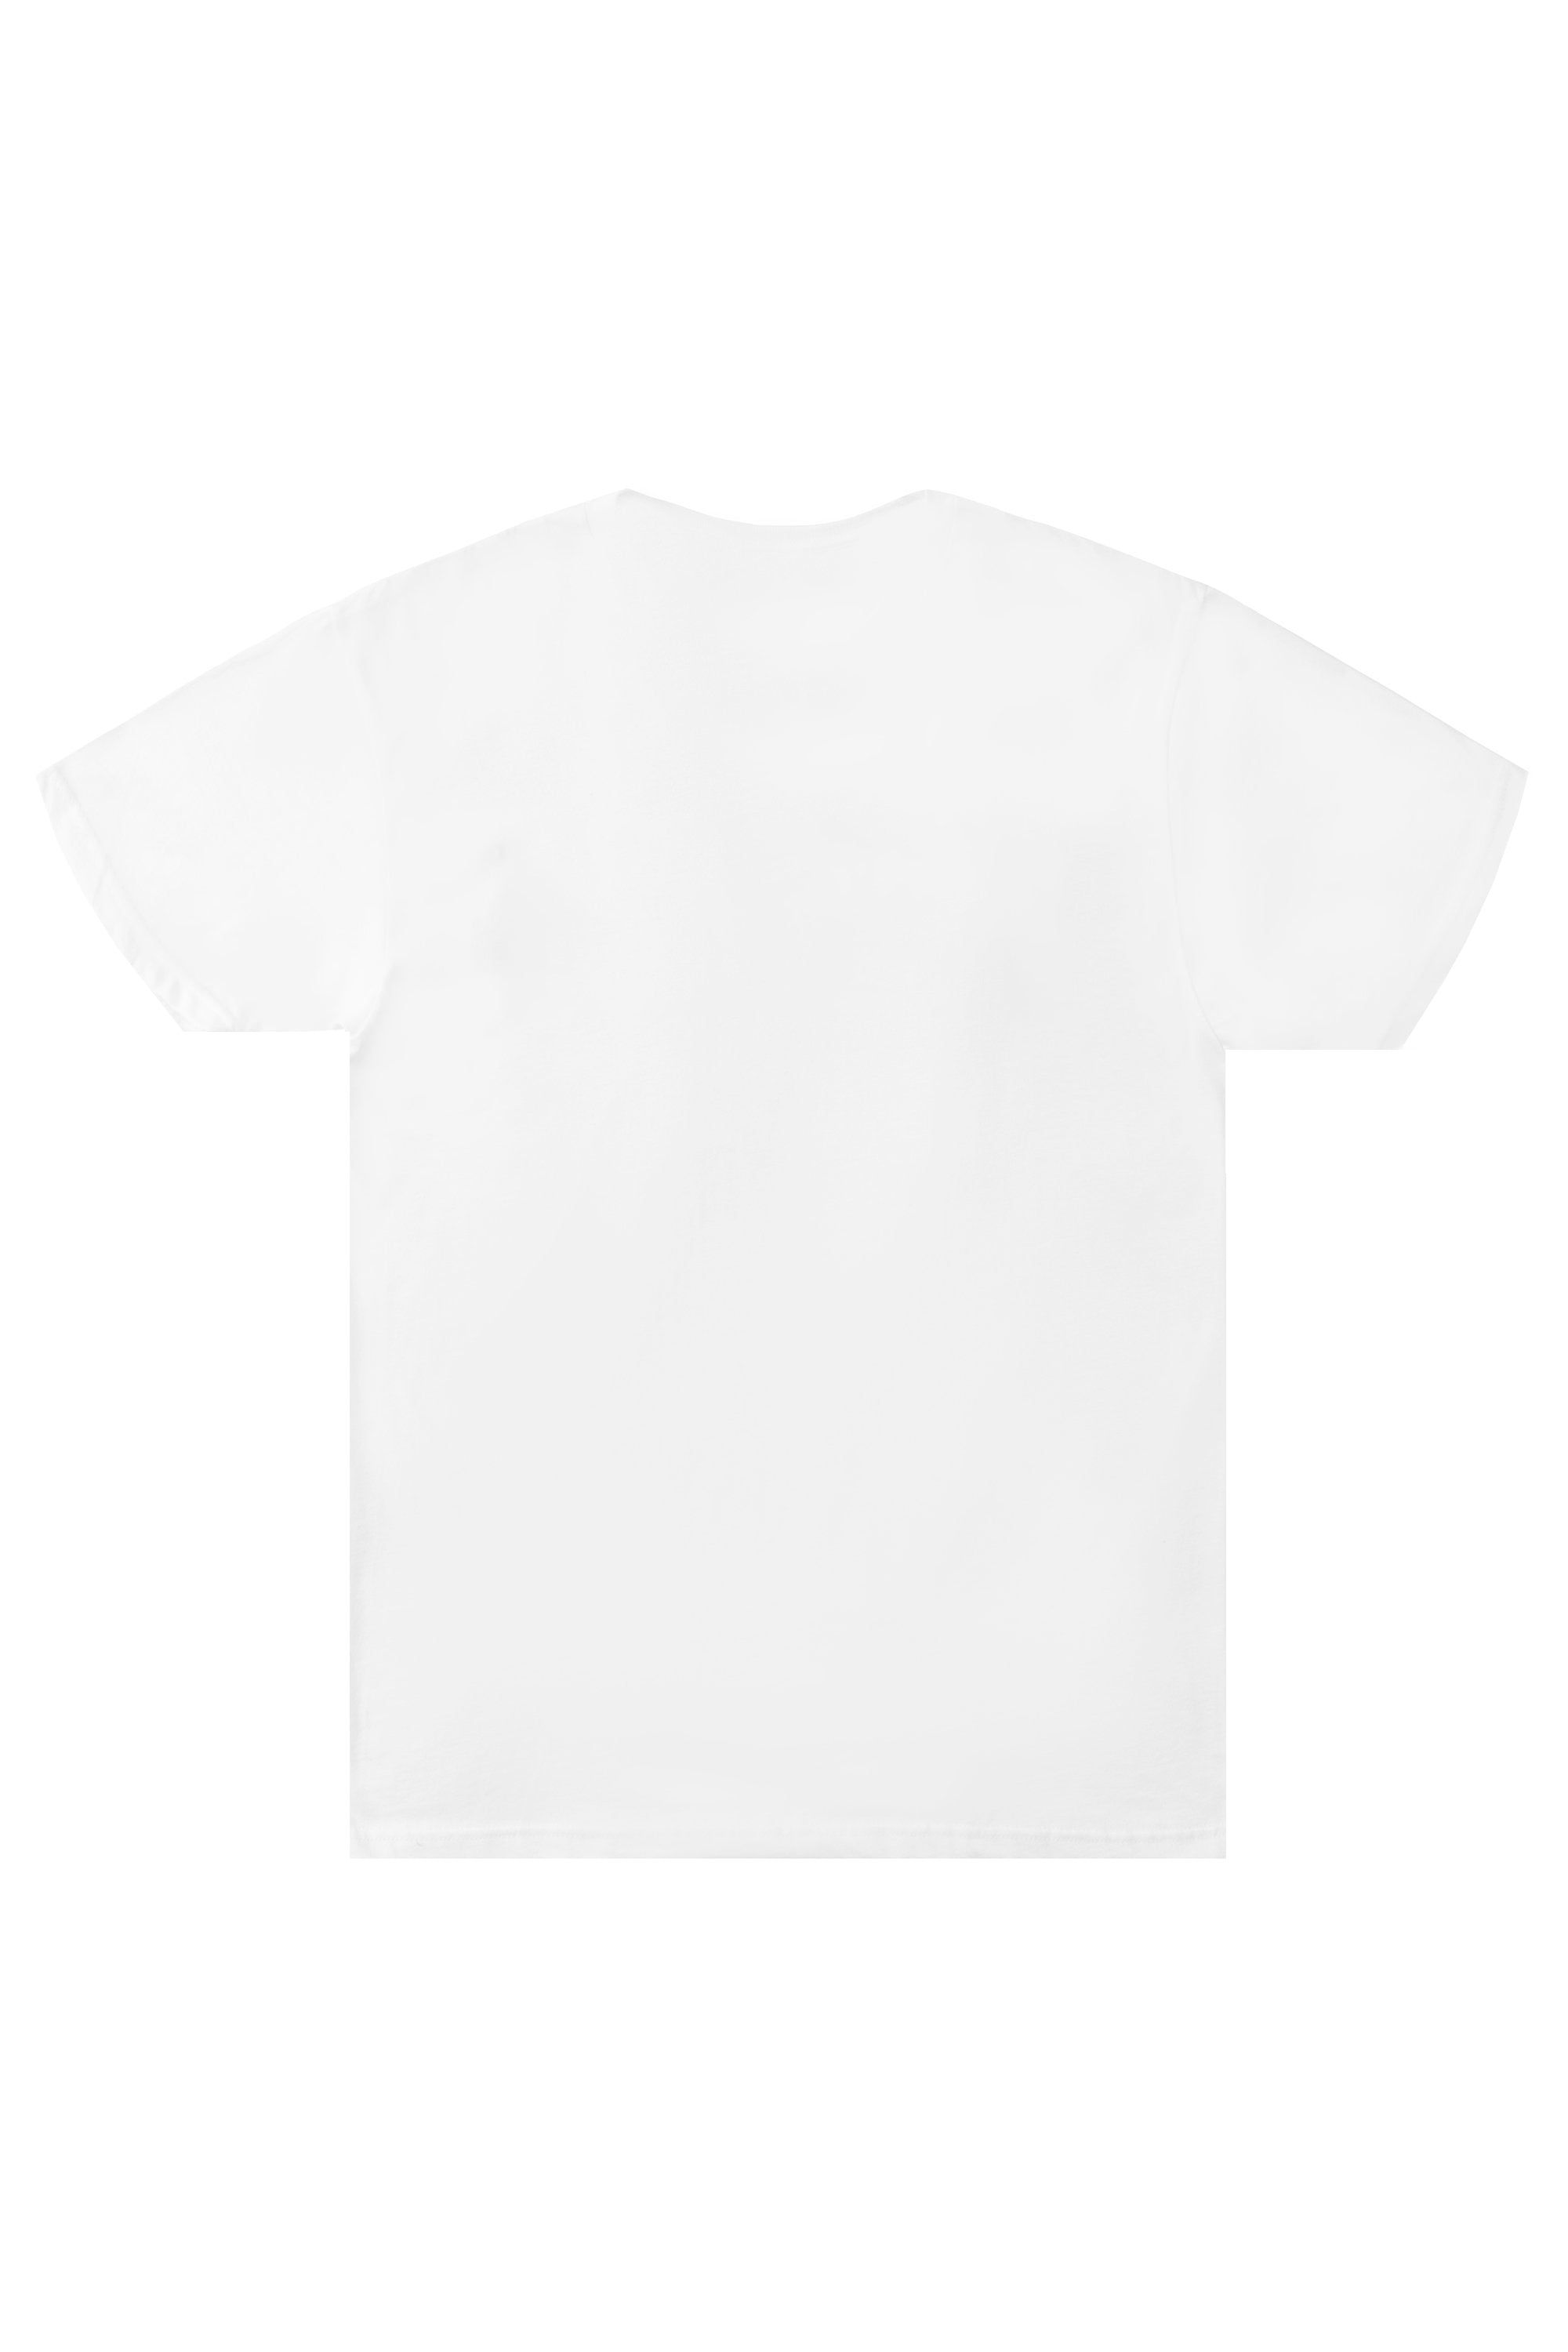 MACE GRAPHIC T-SHIRT -SILVER